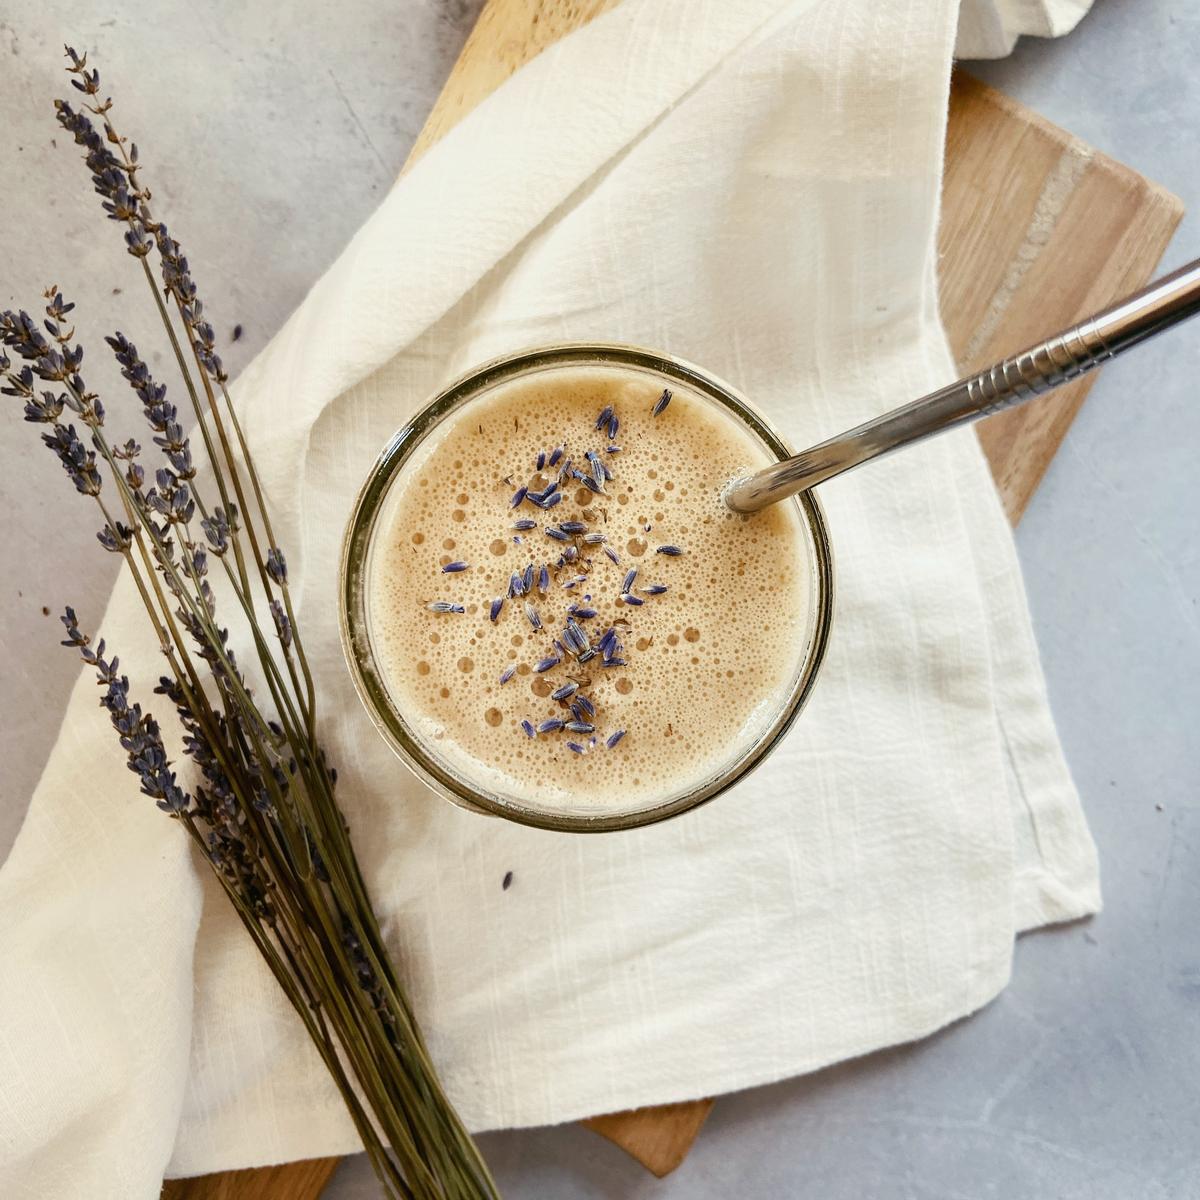 Overhead view of honey lavender latte in a glass cup with lavender buds on top.